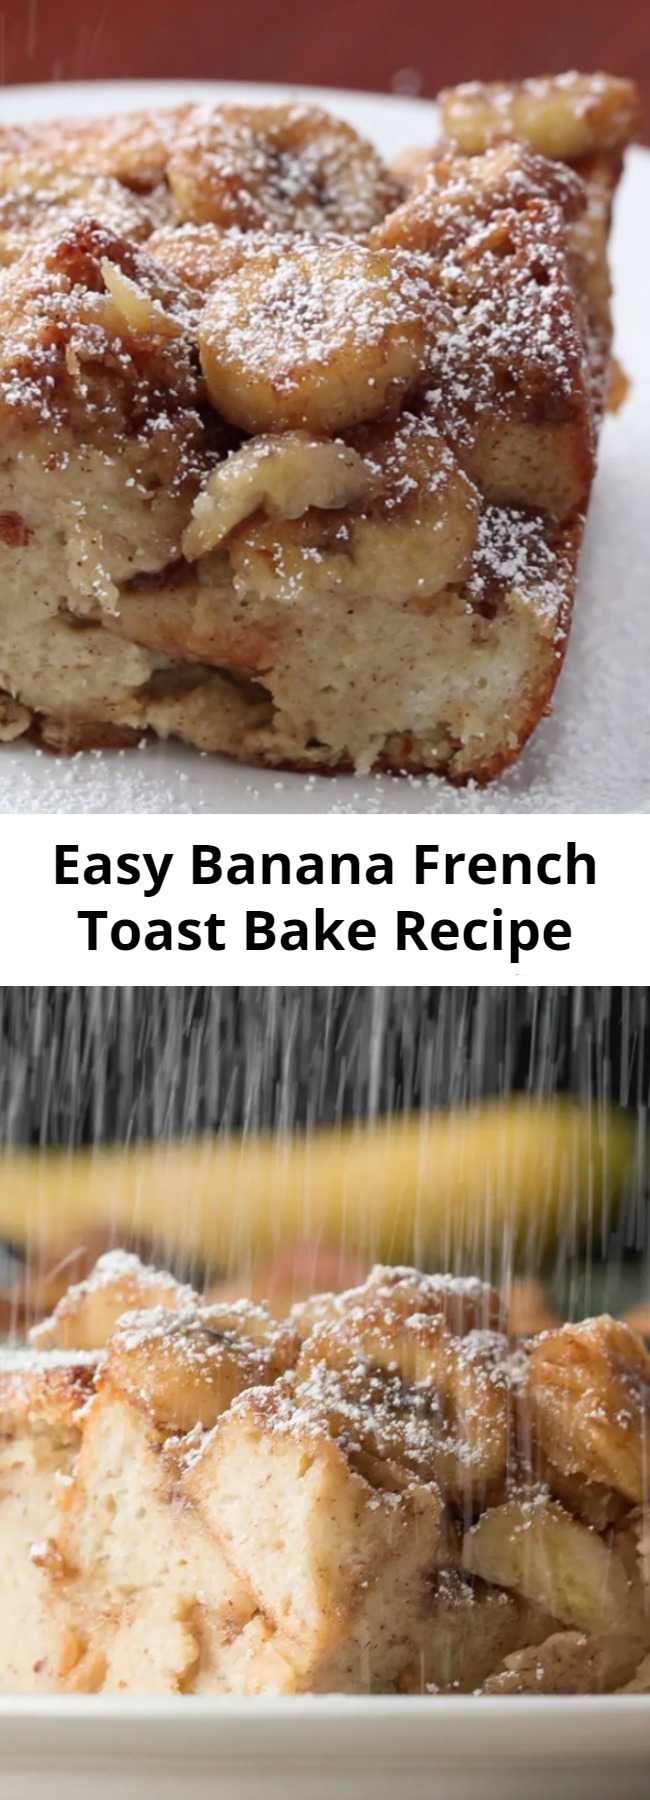 Easy Banana French Toast Bake Recipe - Save time without the hassle of dipping individual pieces and frying on the stove top. Any kind of sandwich bread will work, and you can add any fruit or cream cheese. I used bananas because it's what I had on hand.